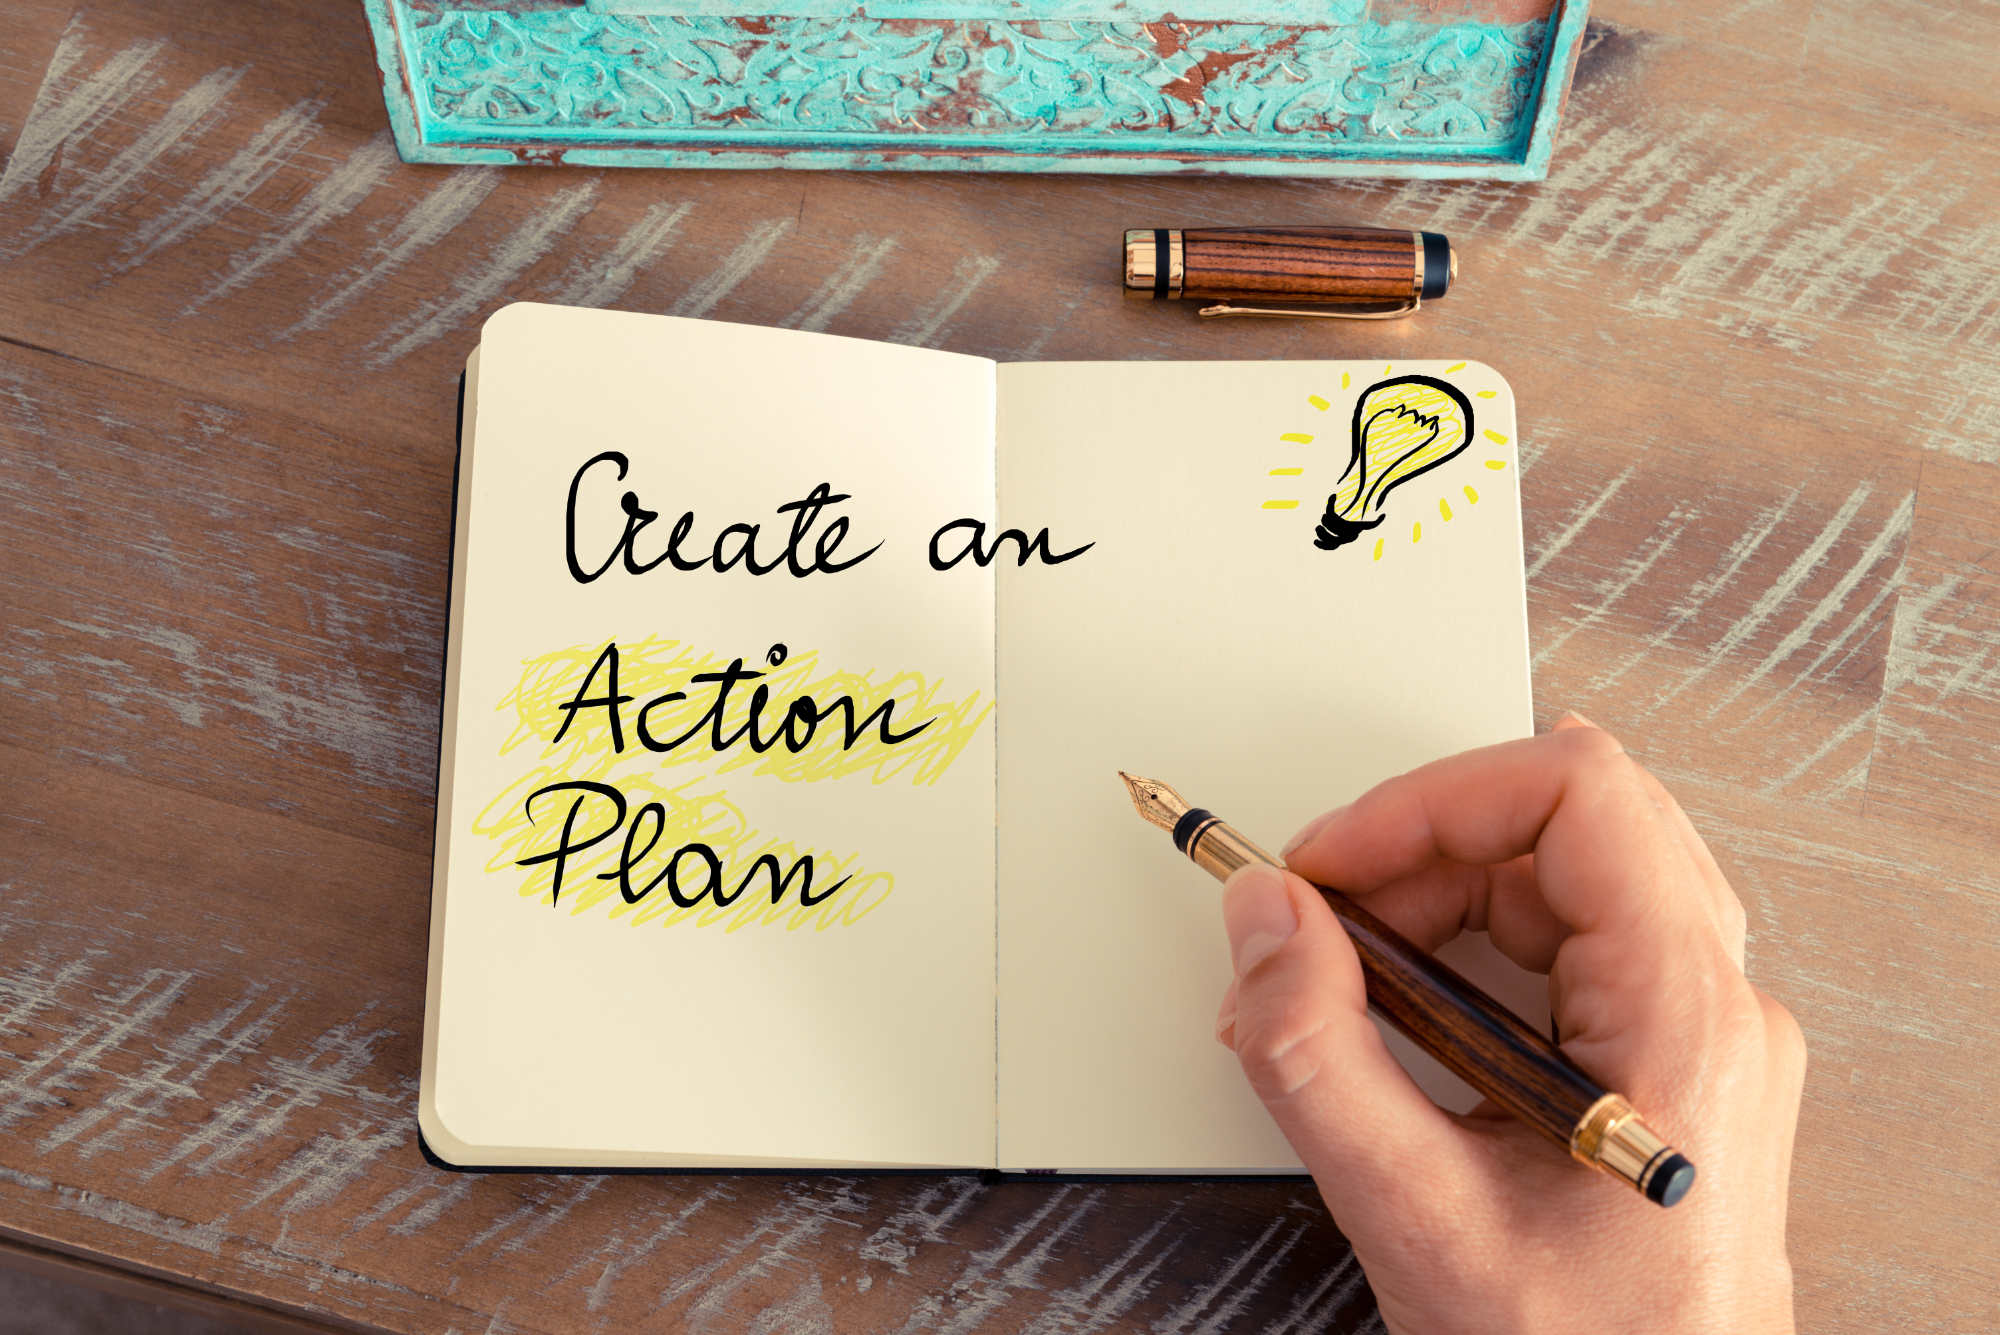 An action plan